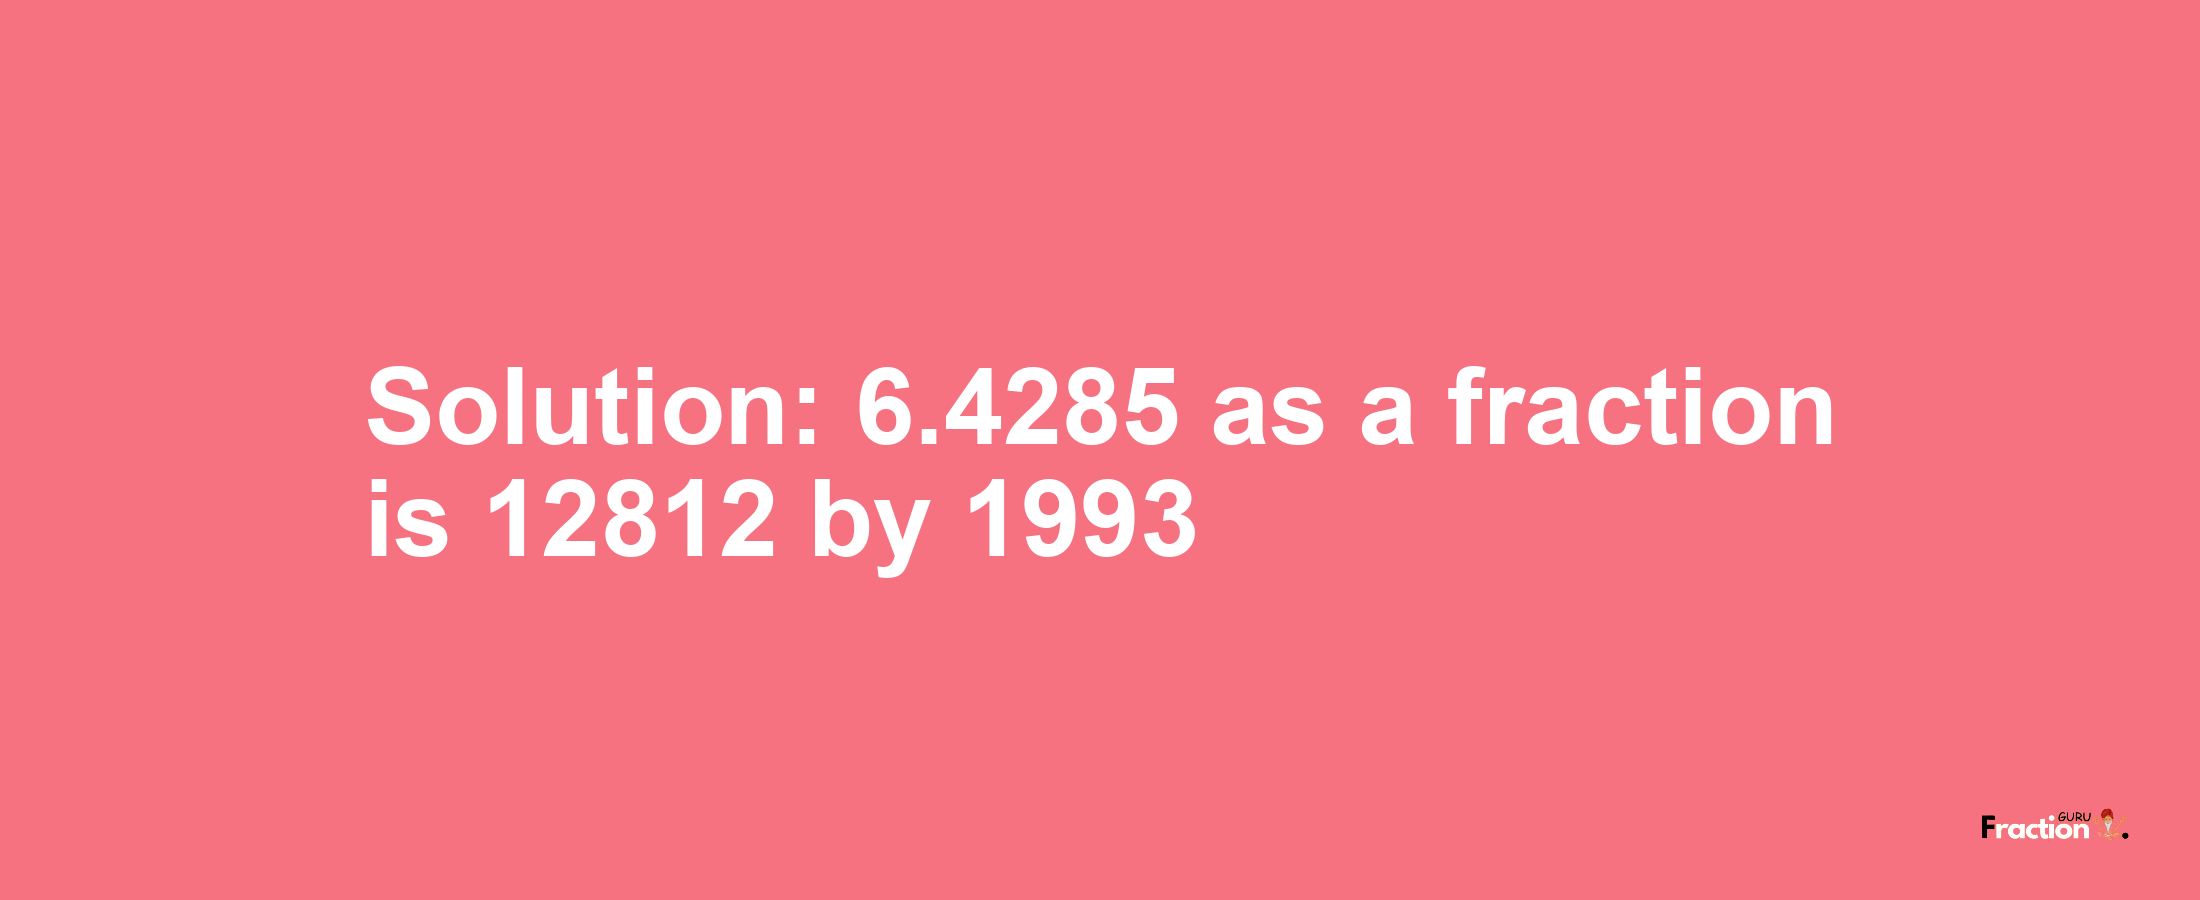 Solution:6.4285 as a fraction is 12812/1993